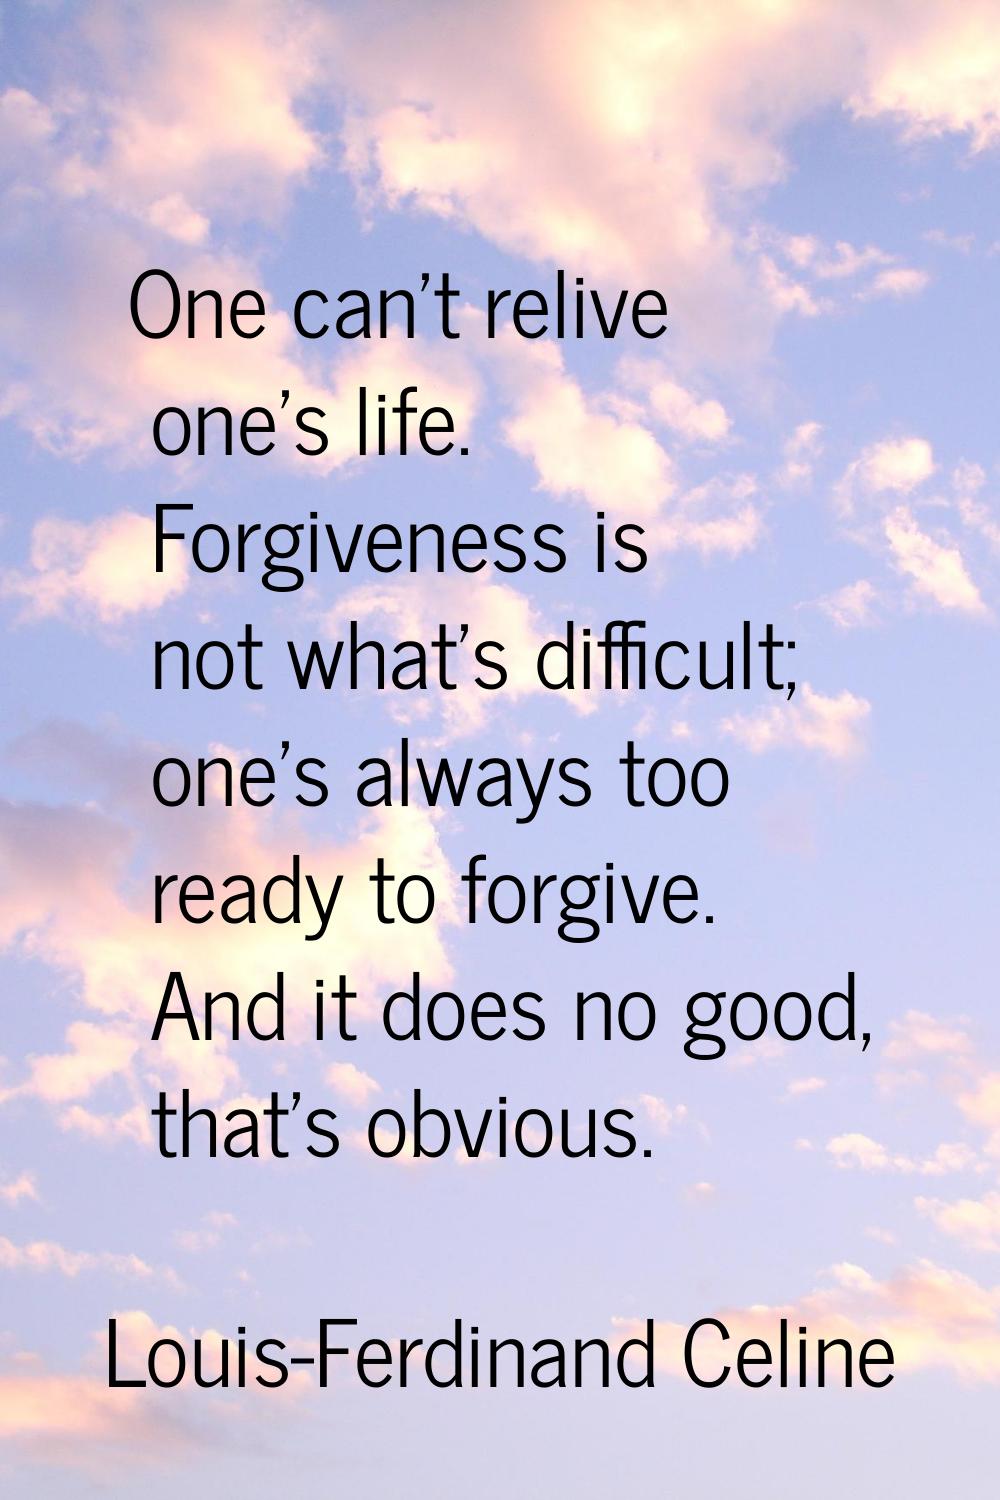 One can't relive one's life. Forgiveness is not what's difficult; one's always too ready to forgive